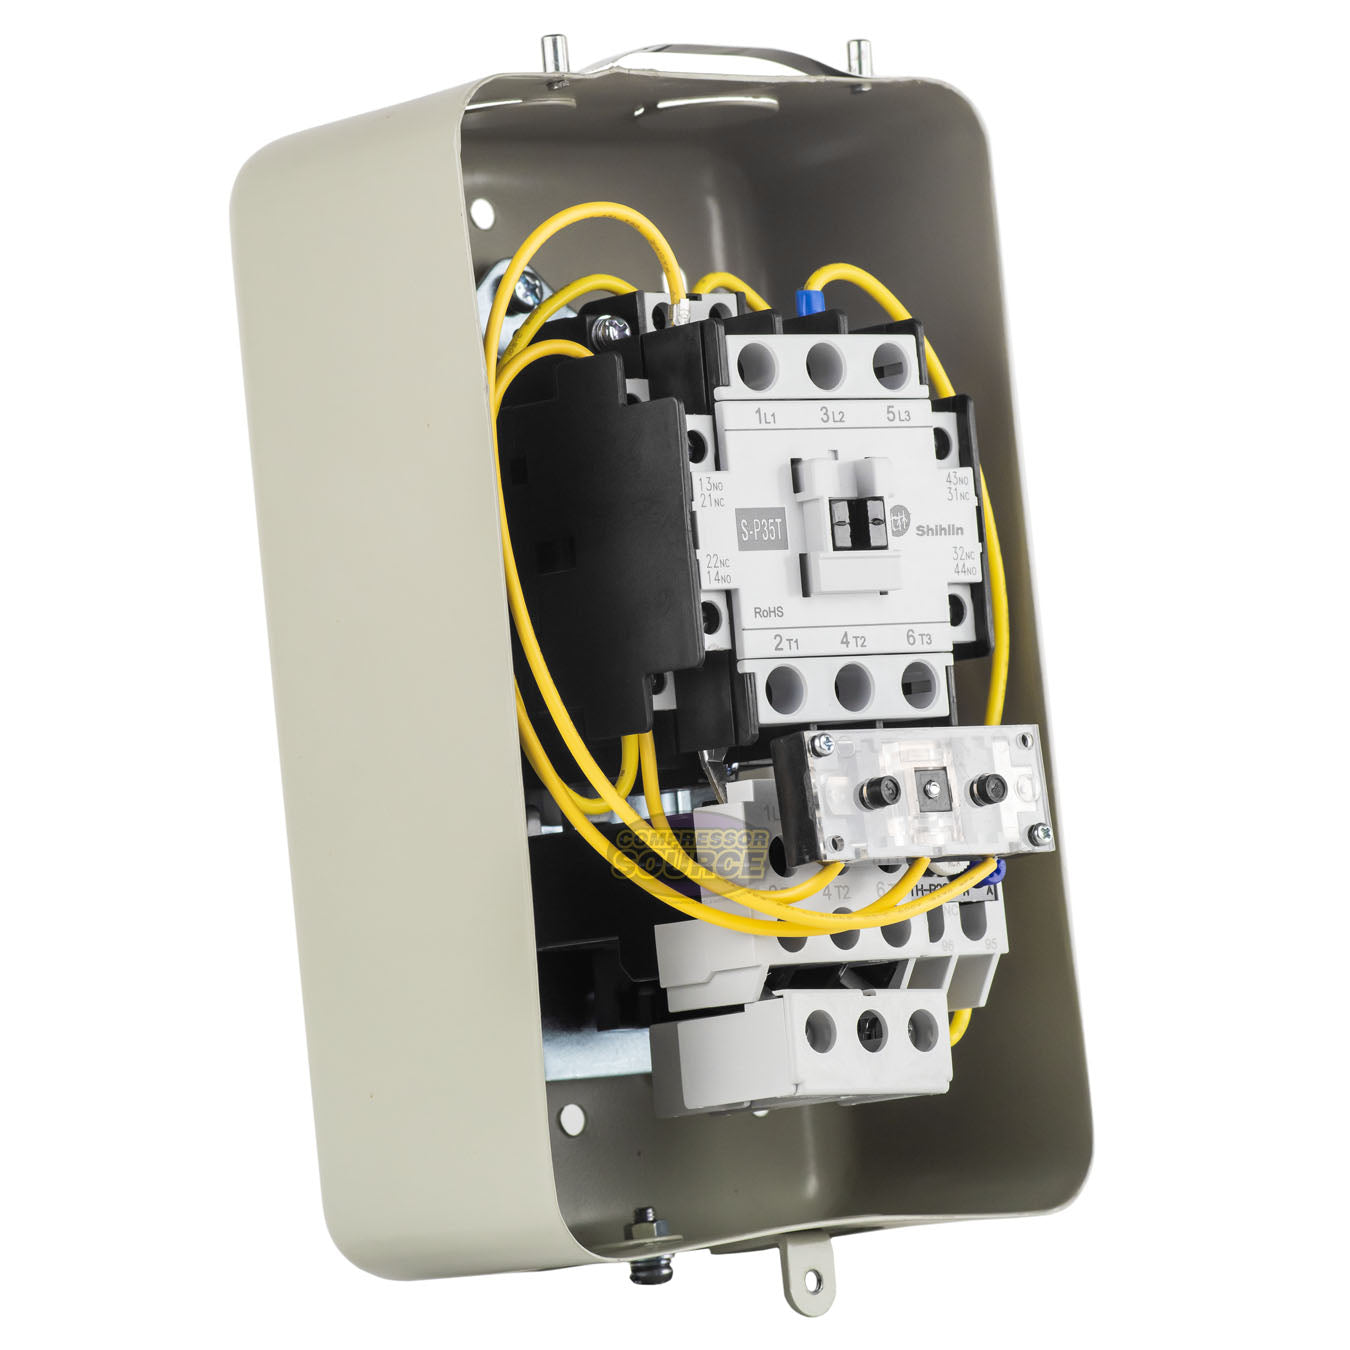 5 Horsepower Single Phase Electric Magnetic Motor Starter Switch w/ On / Off Control MSP30TPB